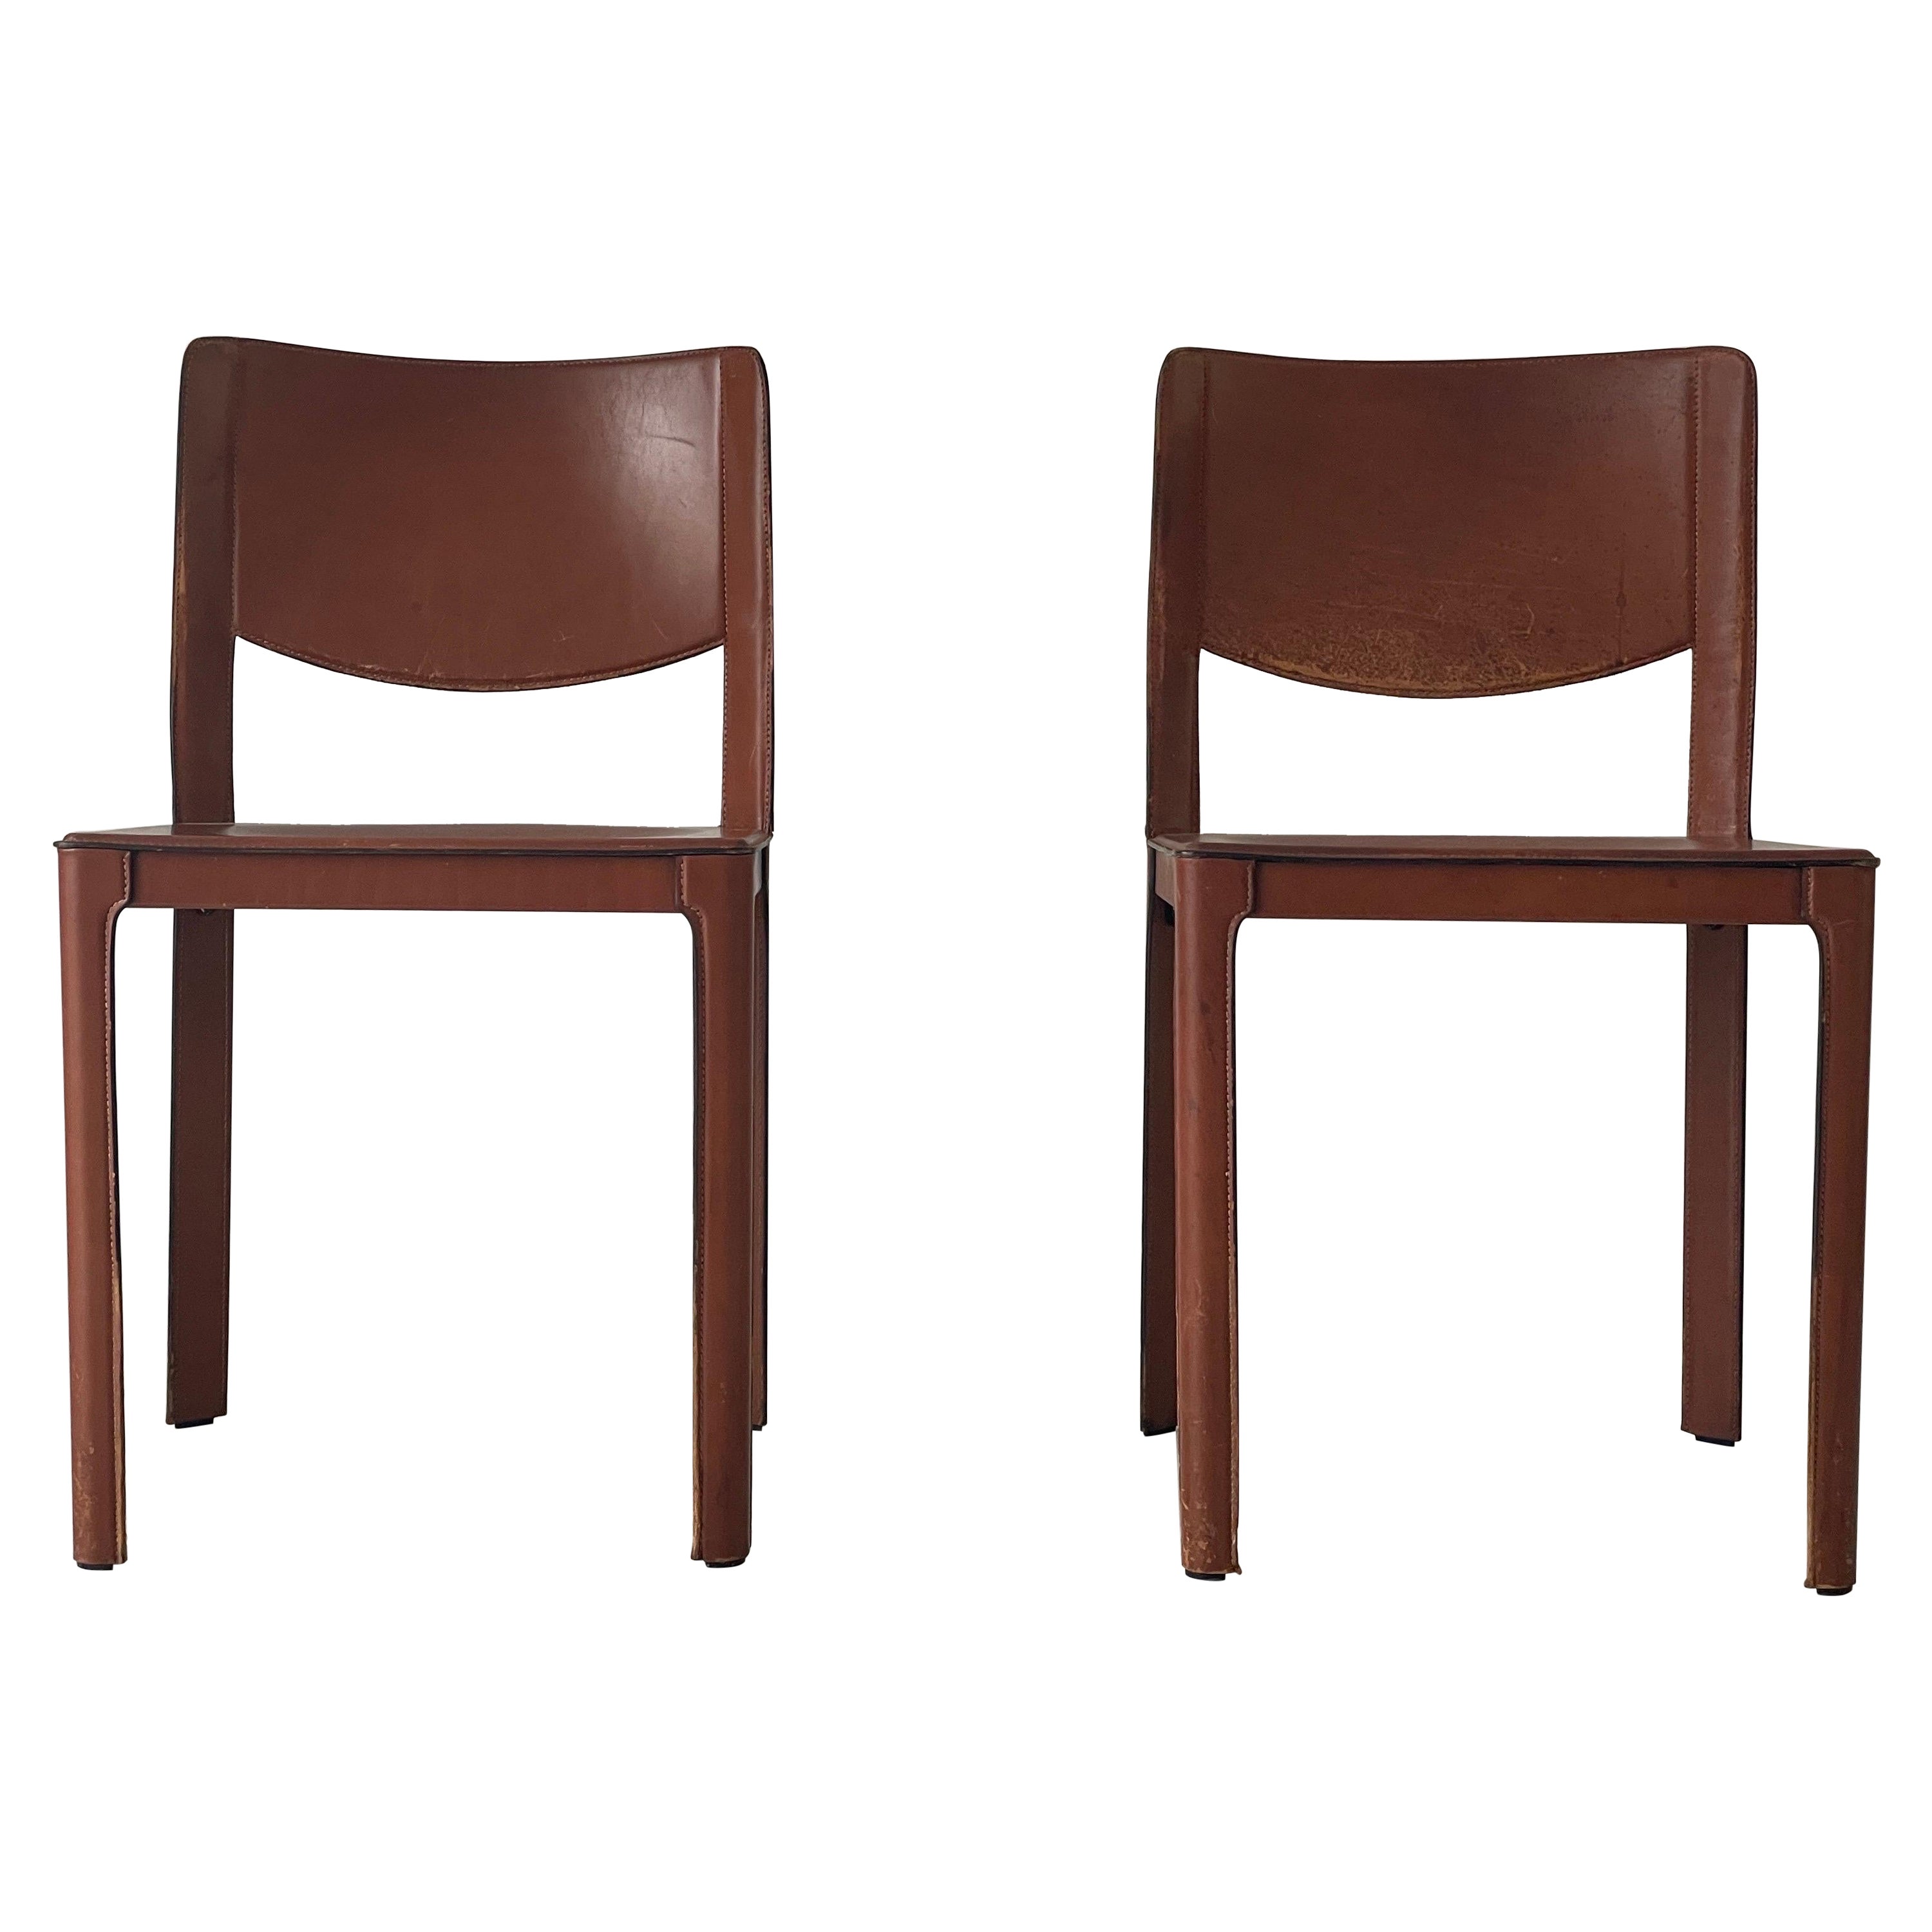 Pair of Italian Brown Leather Chairs by Matteo Grassi, 1970s, Italy For Sale